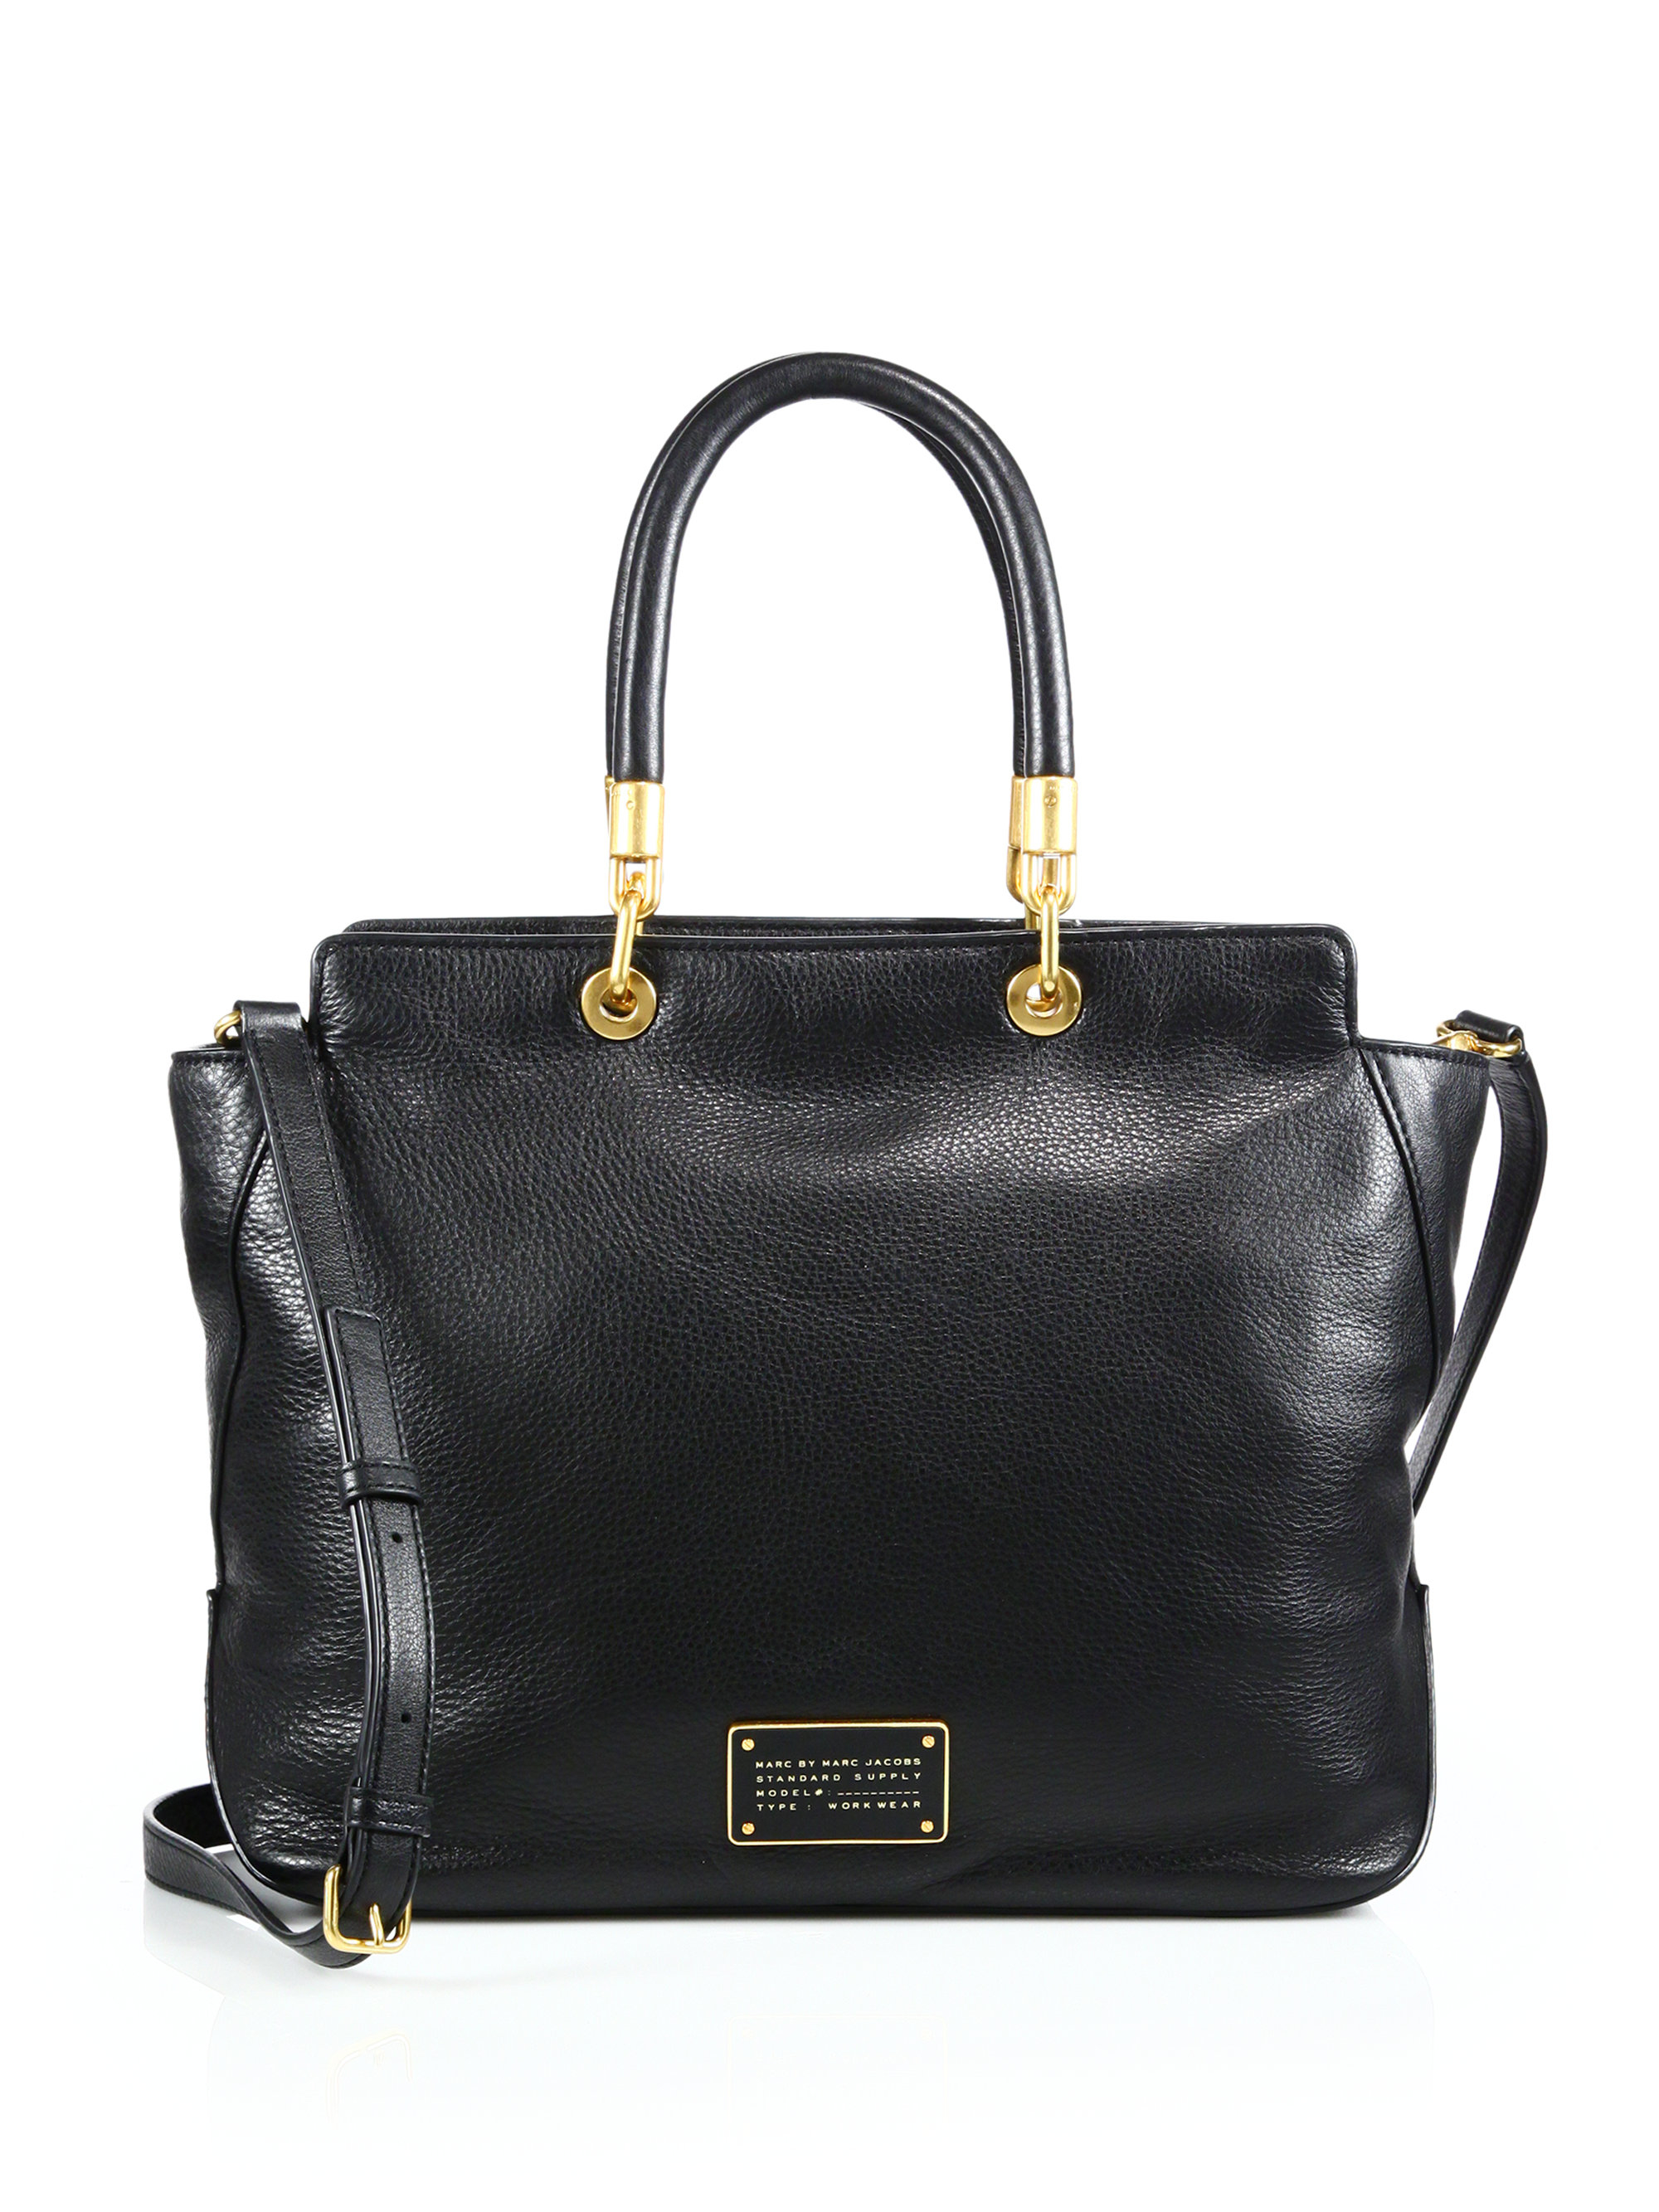 Marc By Marc Jacobs Bentley Leather Tote in Black - Lyst